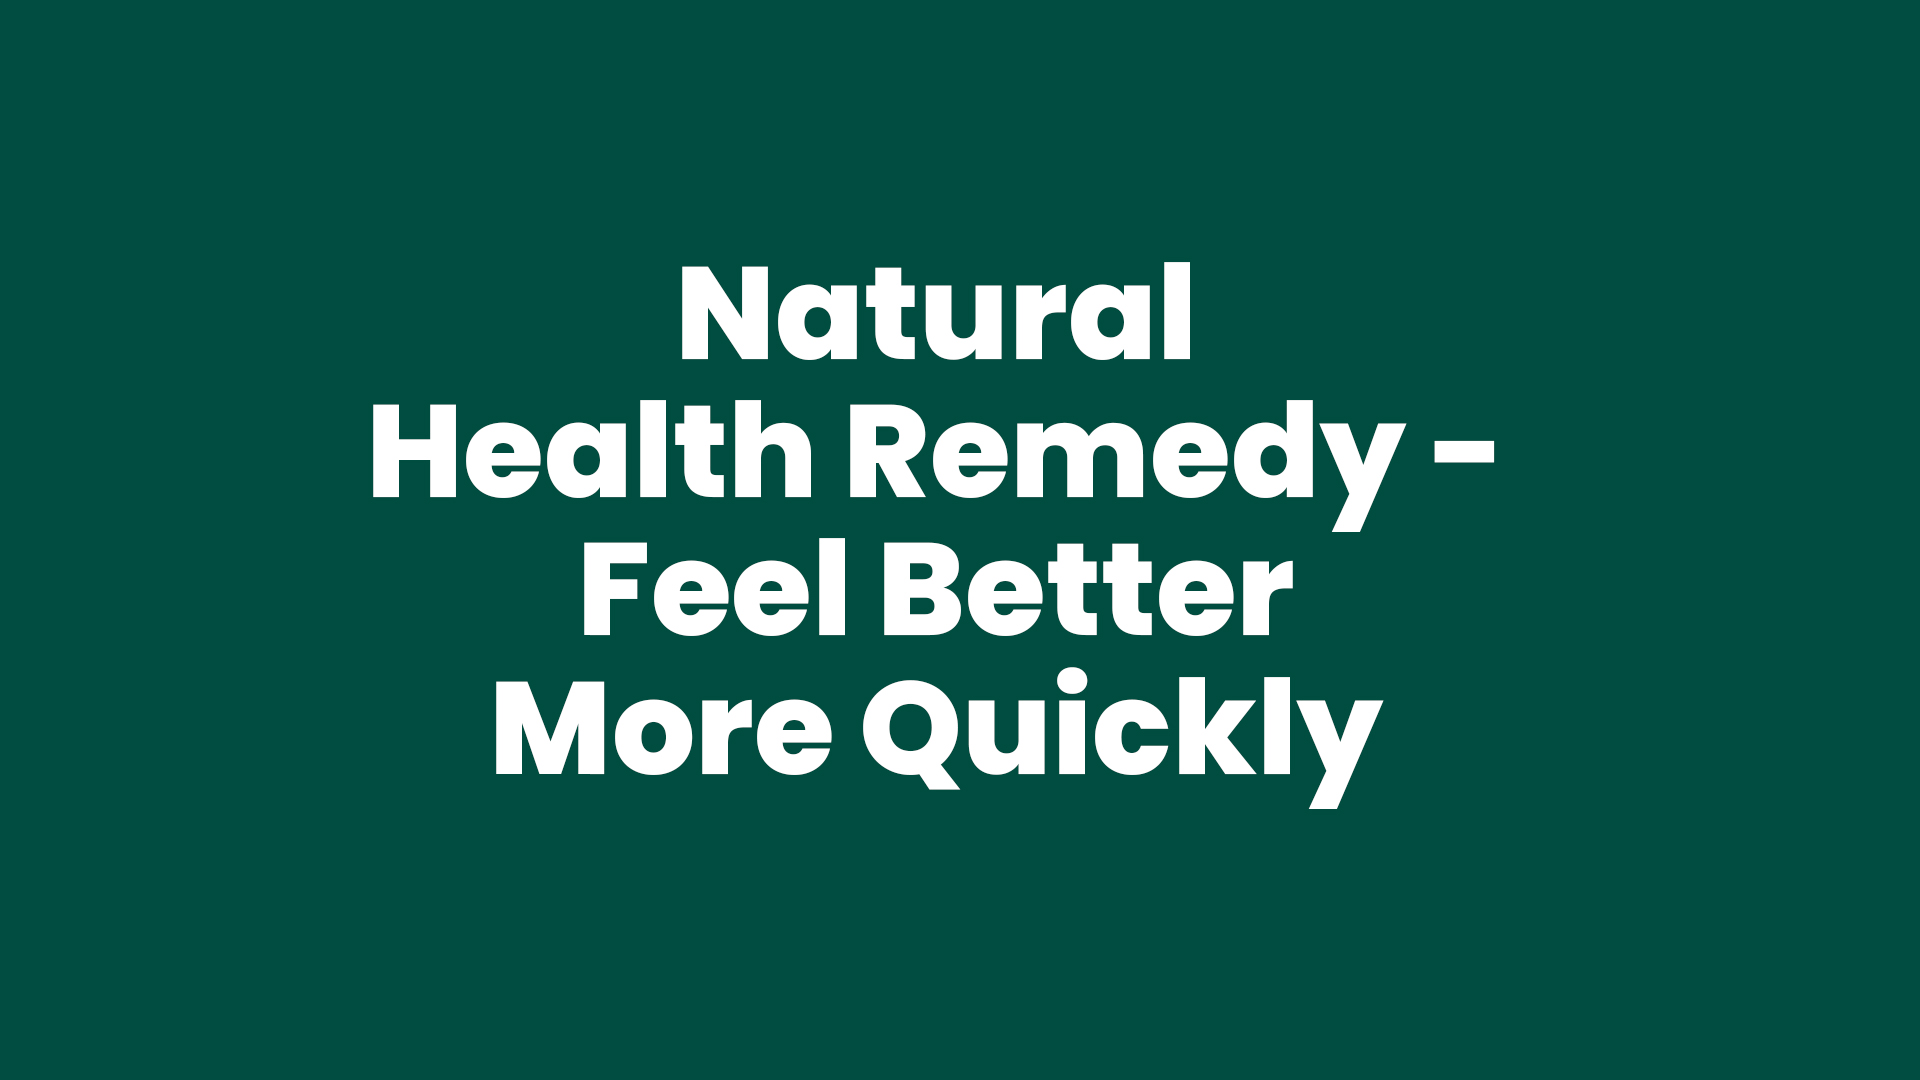 Natural Health Remedy - Feel Better More Quickly